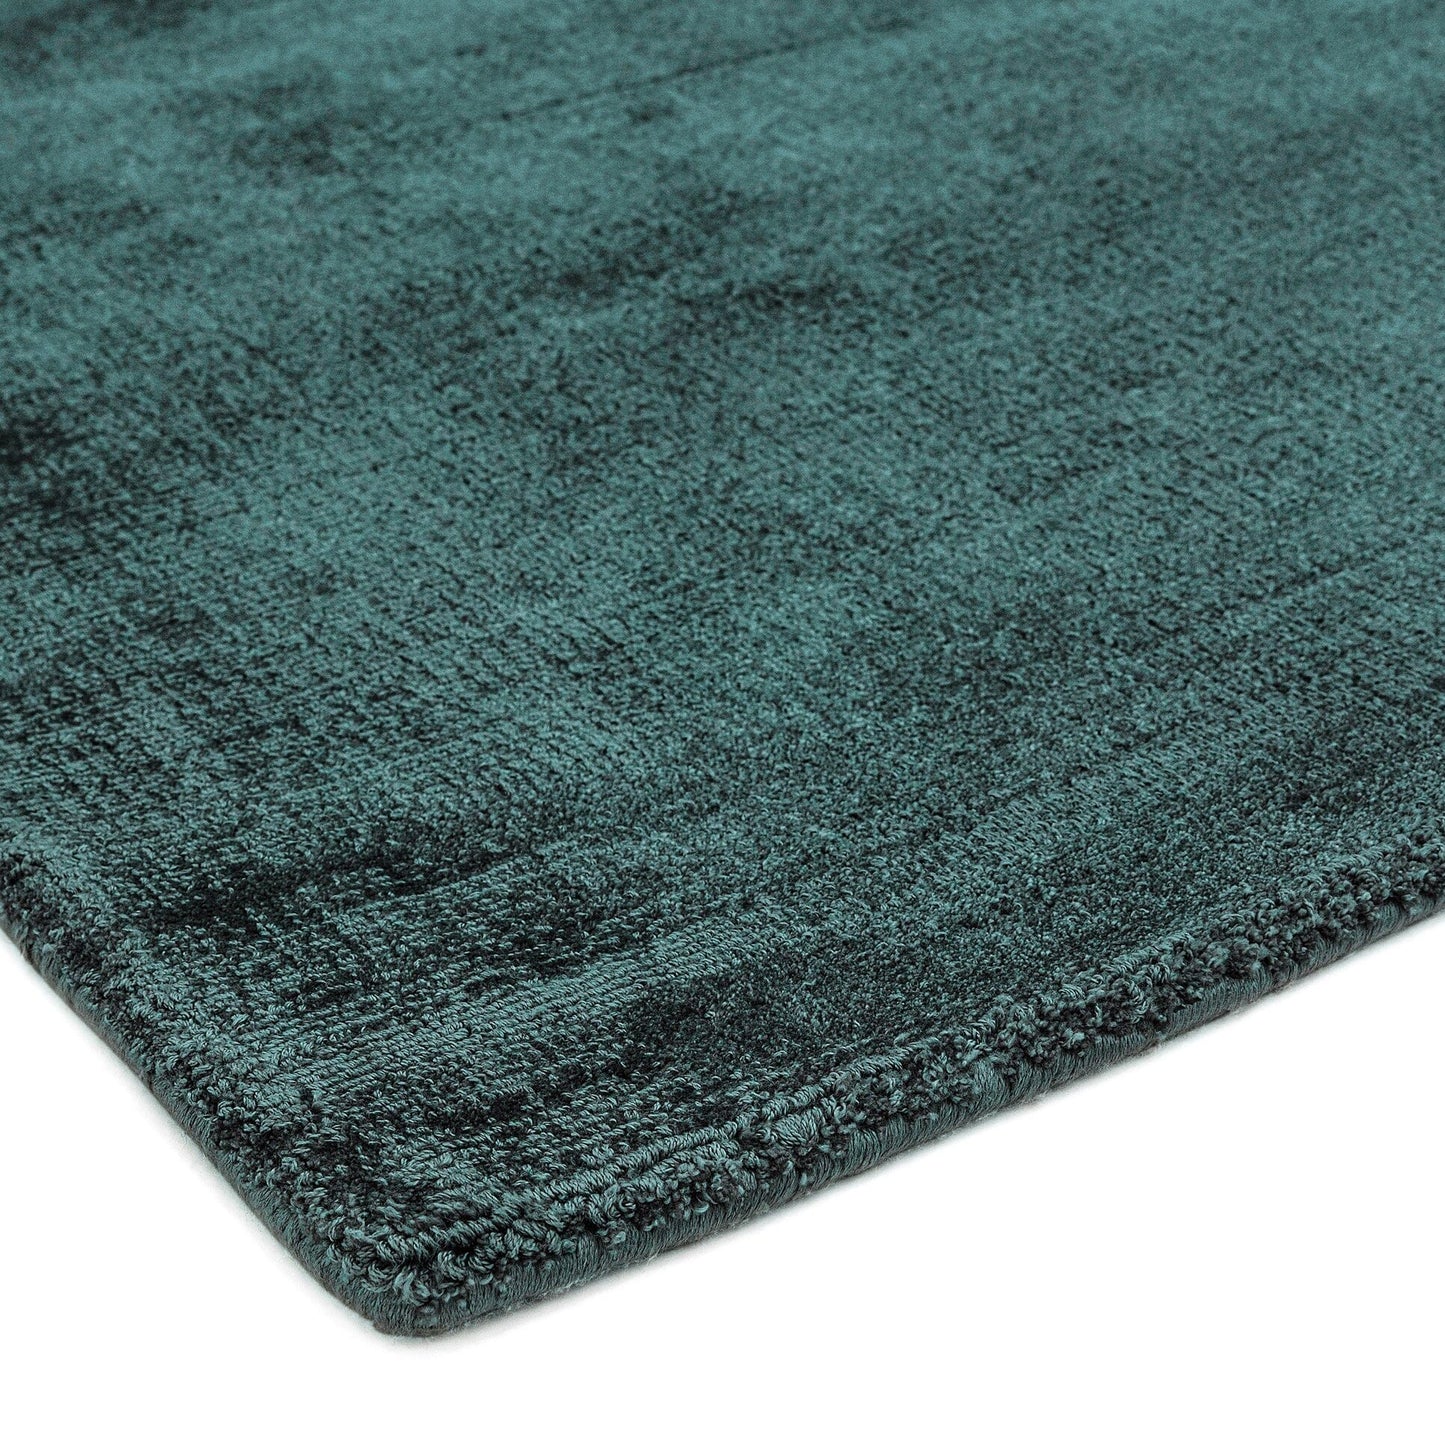 Asiatic Carpets Blade Hand Woven Rug Teal - 200 x 290cm